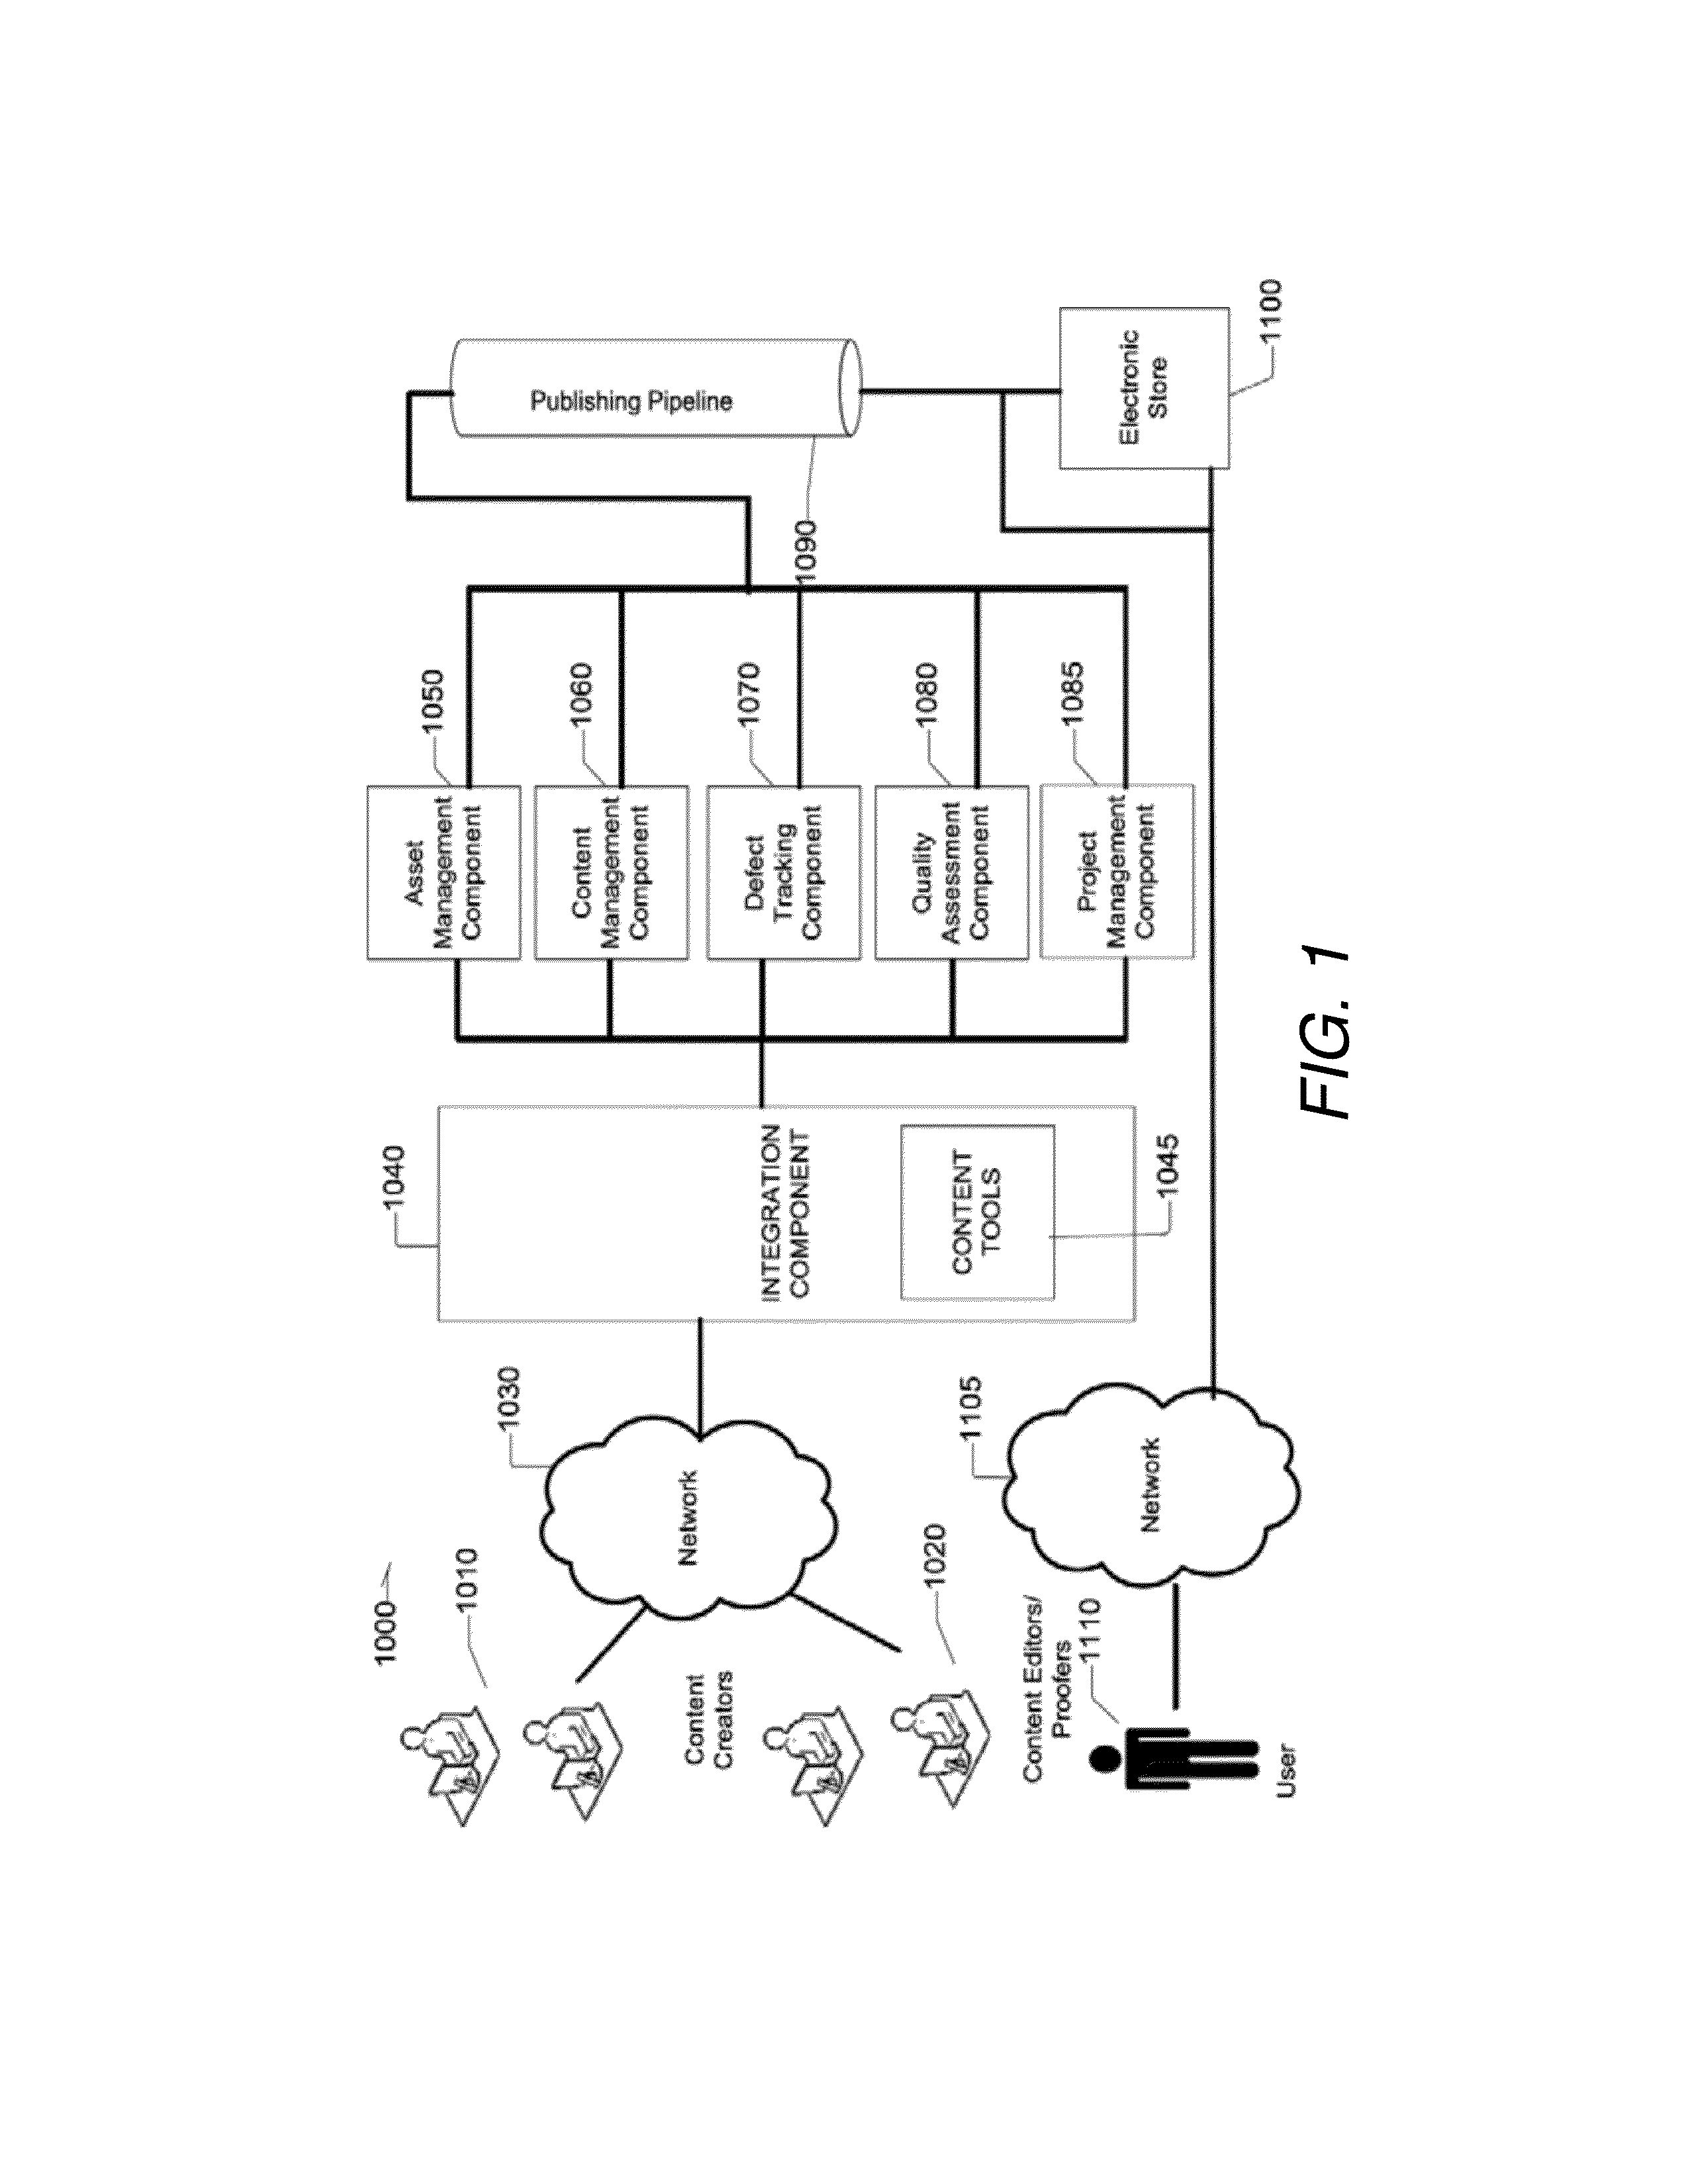 Systems and methods for creating, editing and publishing cross-platform interactive electronic works